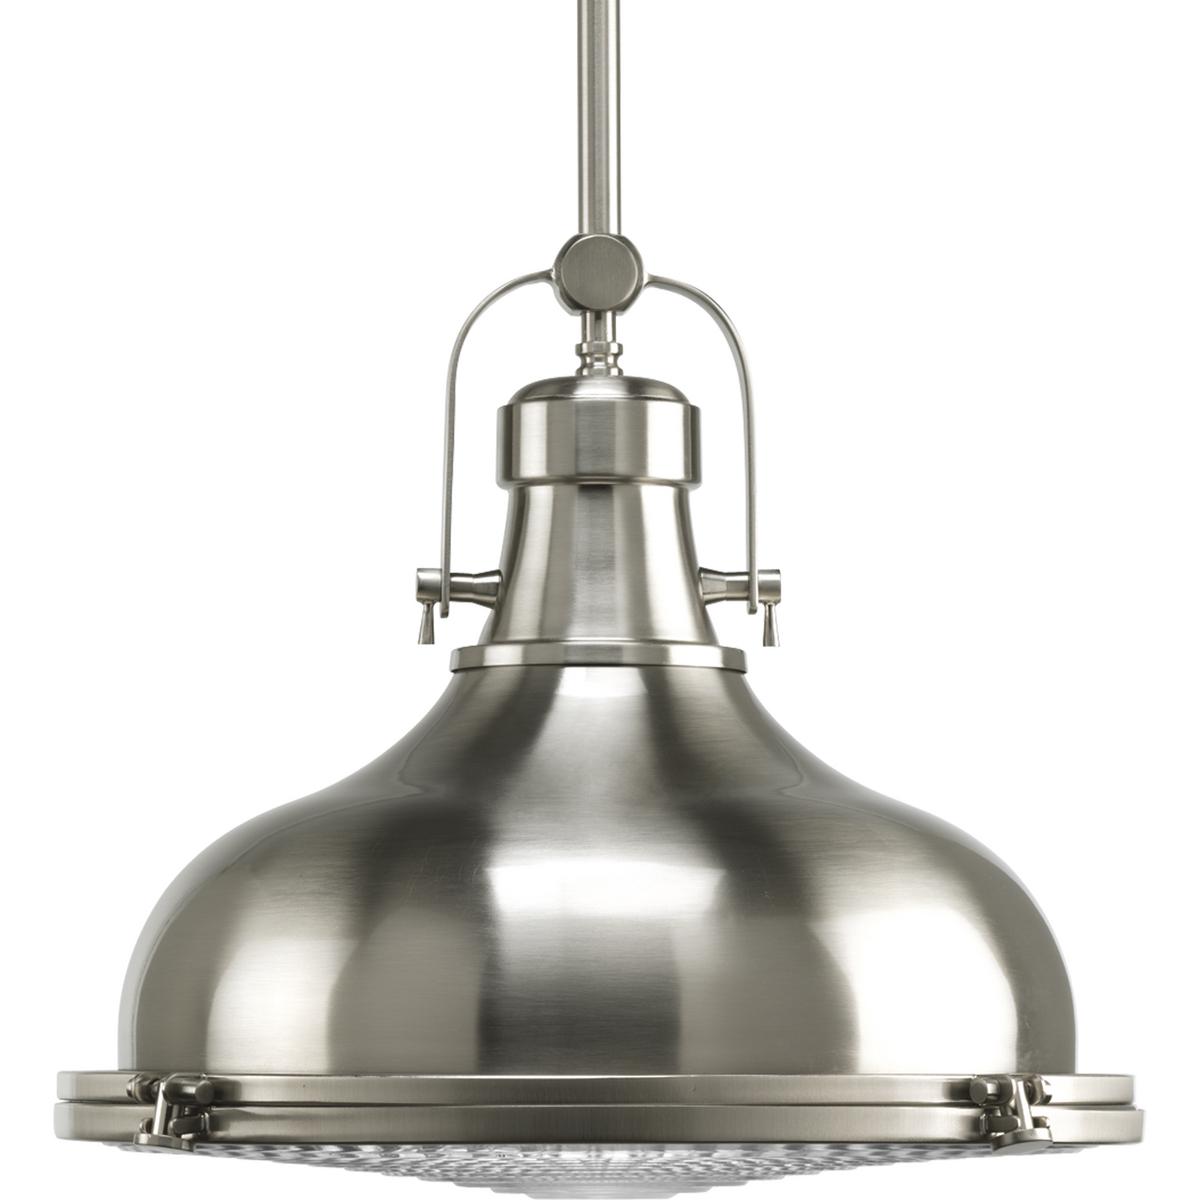 Hubbell P5197-09 The one-light 16" pendant features industrial roots in both form and function. The Brushed Nickel finish highlight the high-quality prismatic glass which adds to the historical aesthetic. Antique style fixture includes a hinge-locking nautical design allo